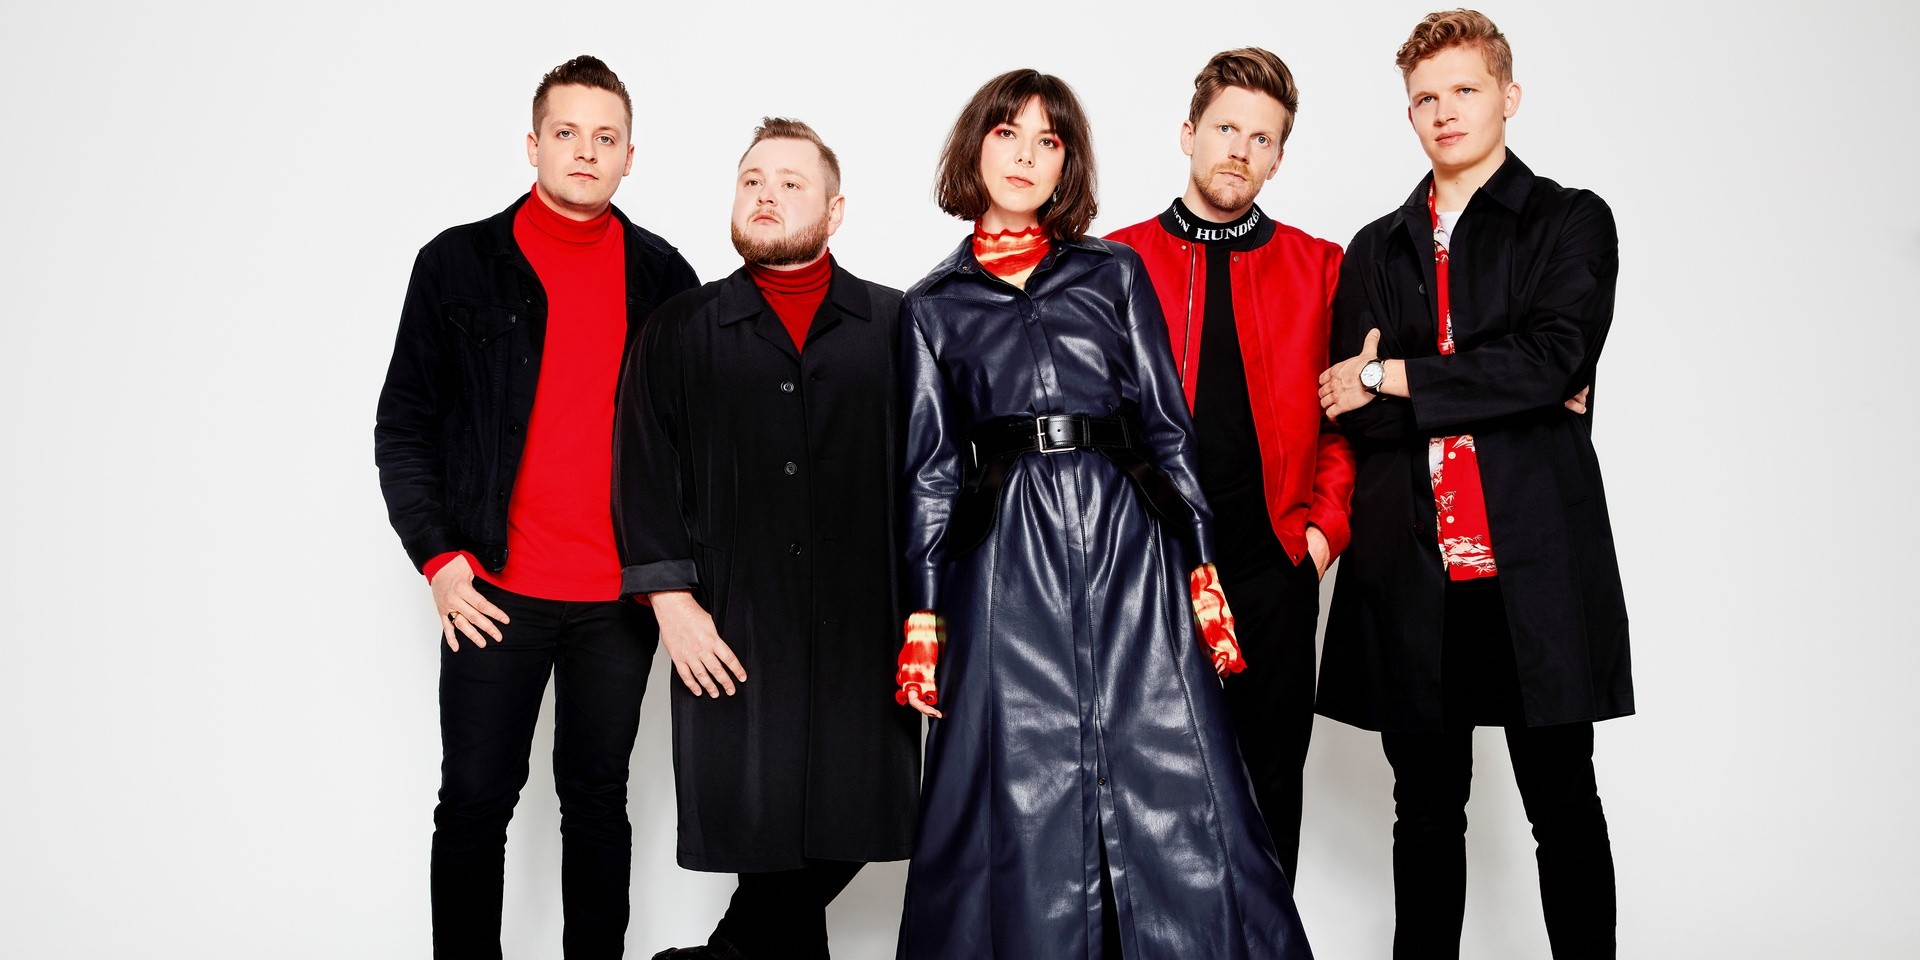 BREAKING: OF MONSTERS AND MEN announce Singapore show 